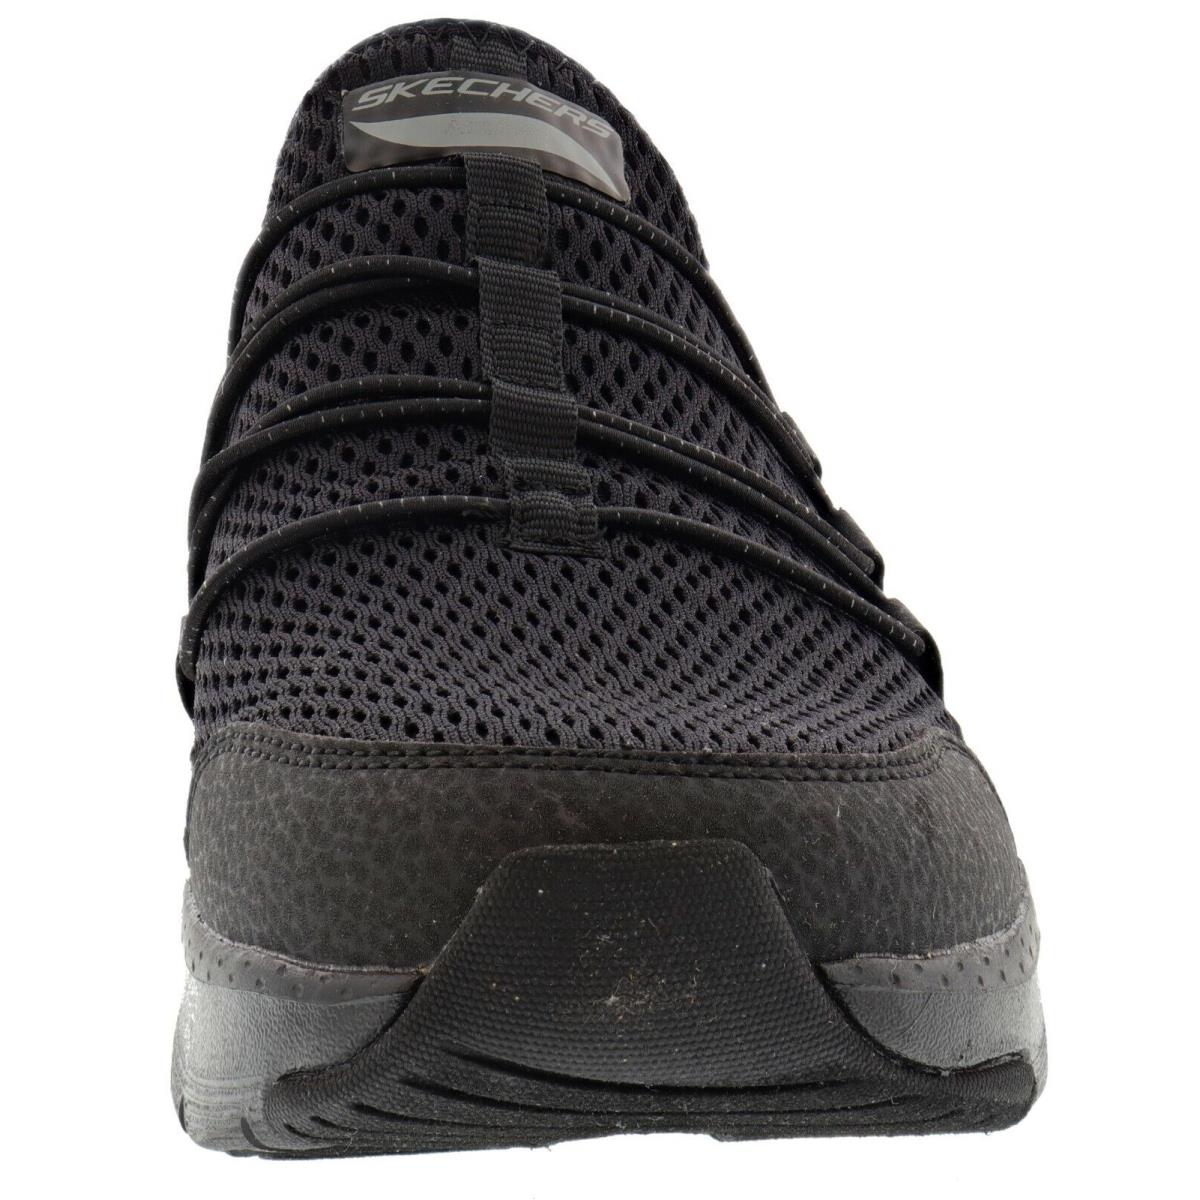 Skechers shoes ARCH LUCKY THOUGHTS - BLACK / BLACK 1